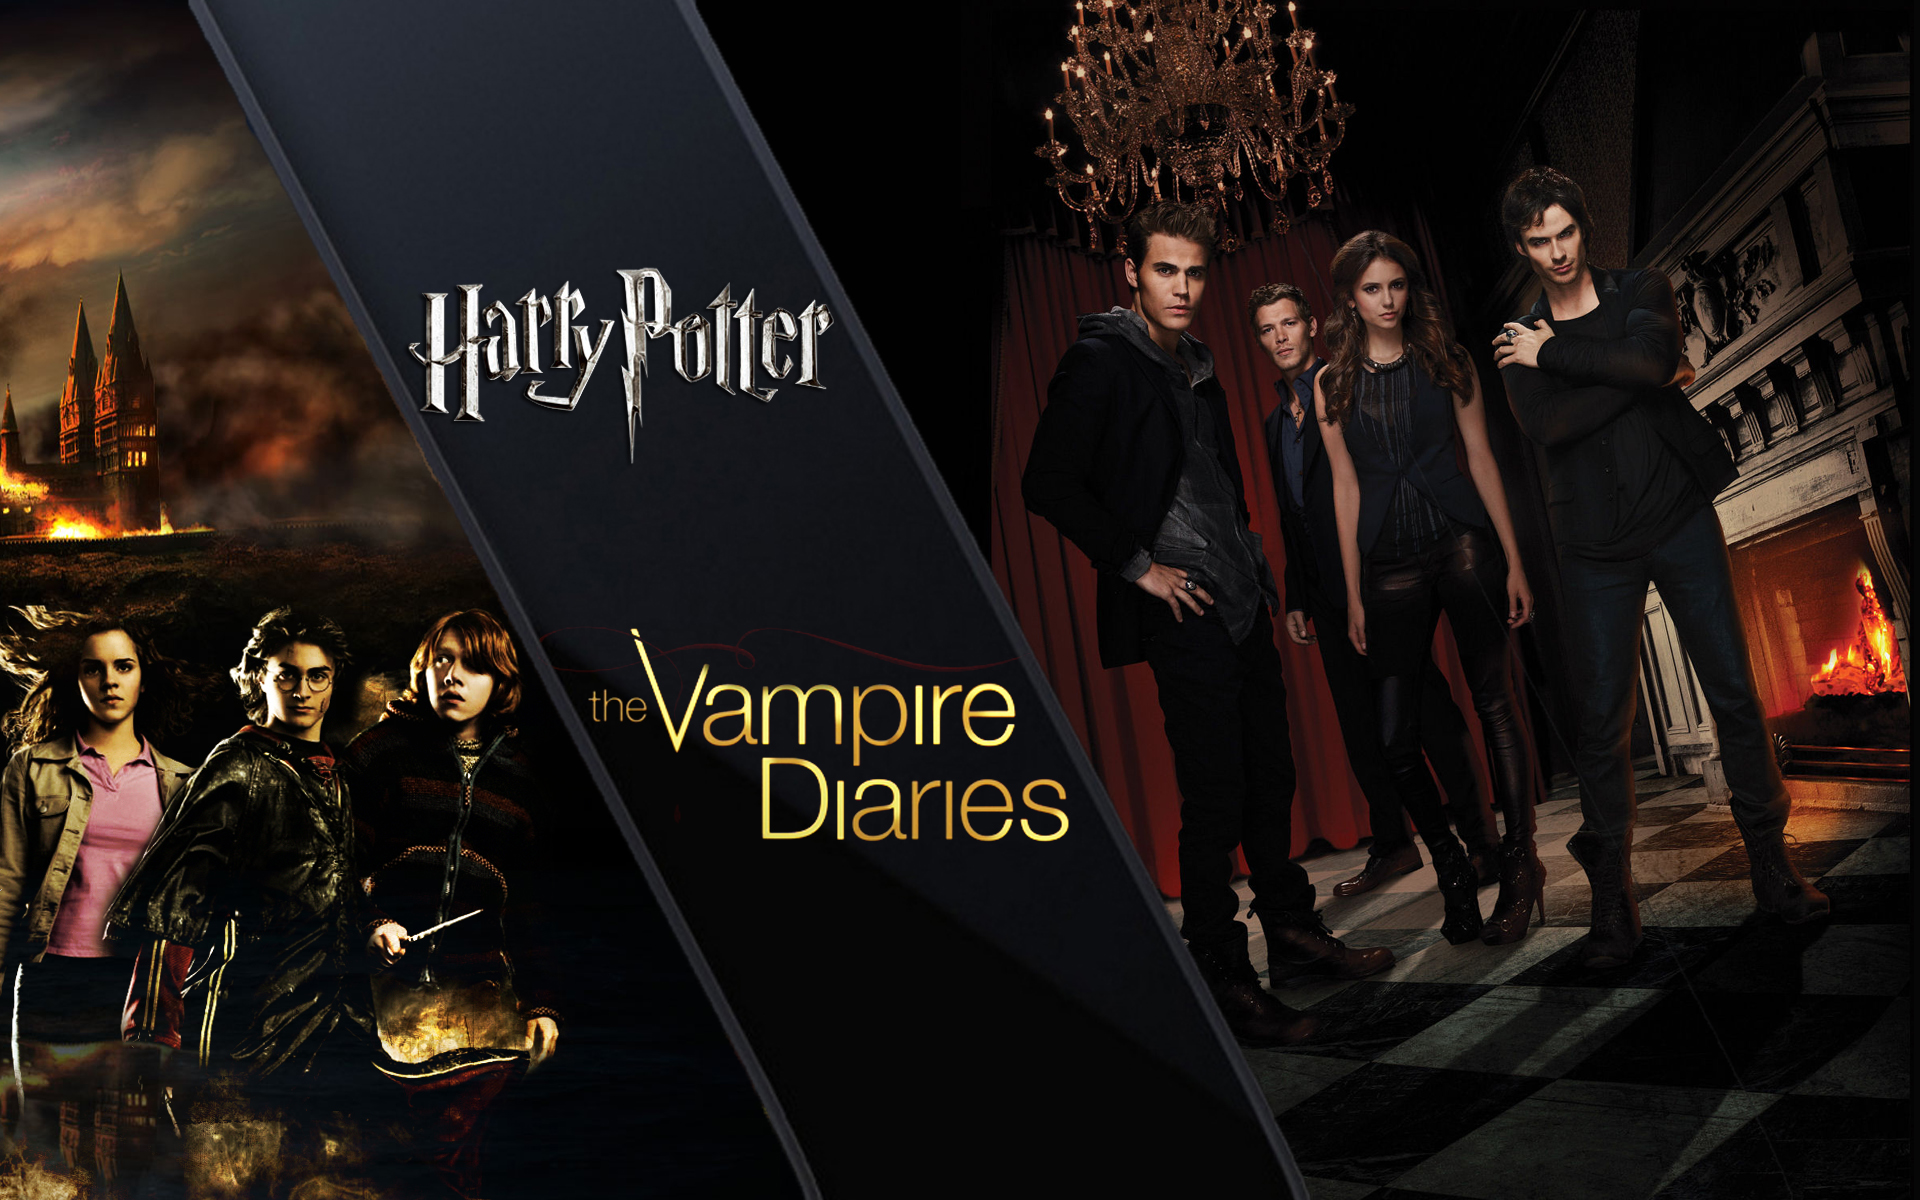 HP and TVD Wallpaper - Harry Potter and The Vampire Diaries ...